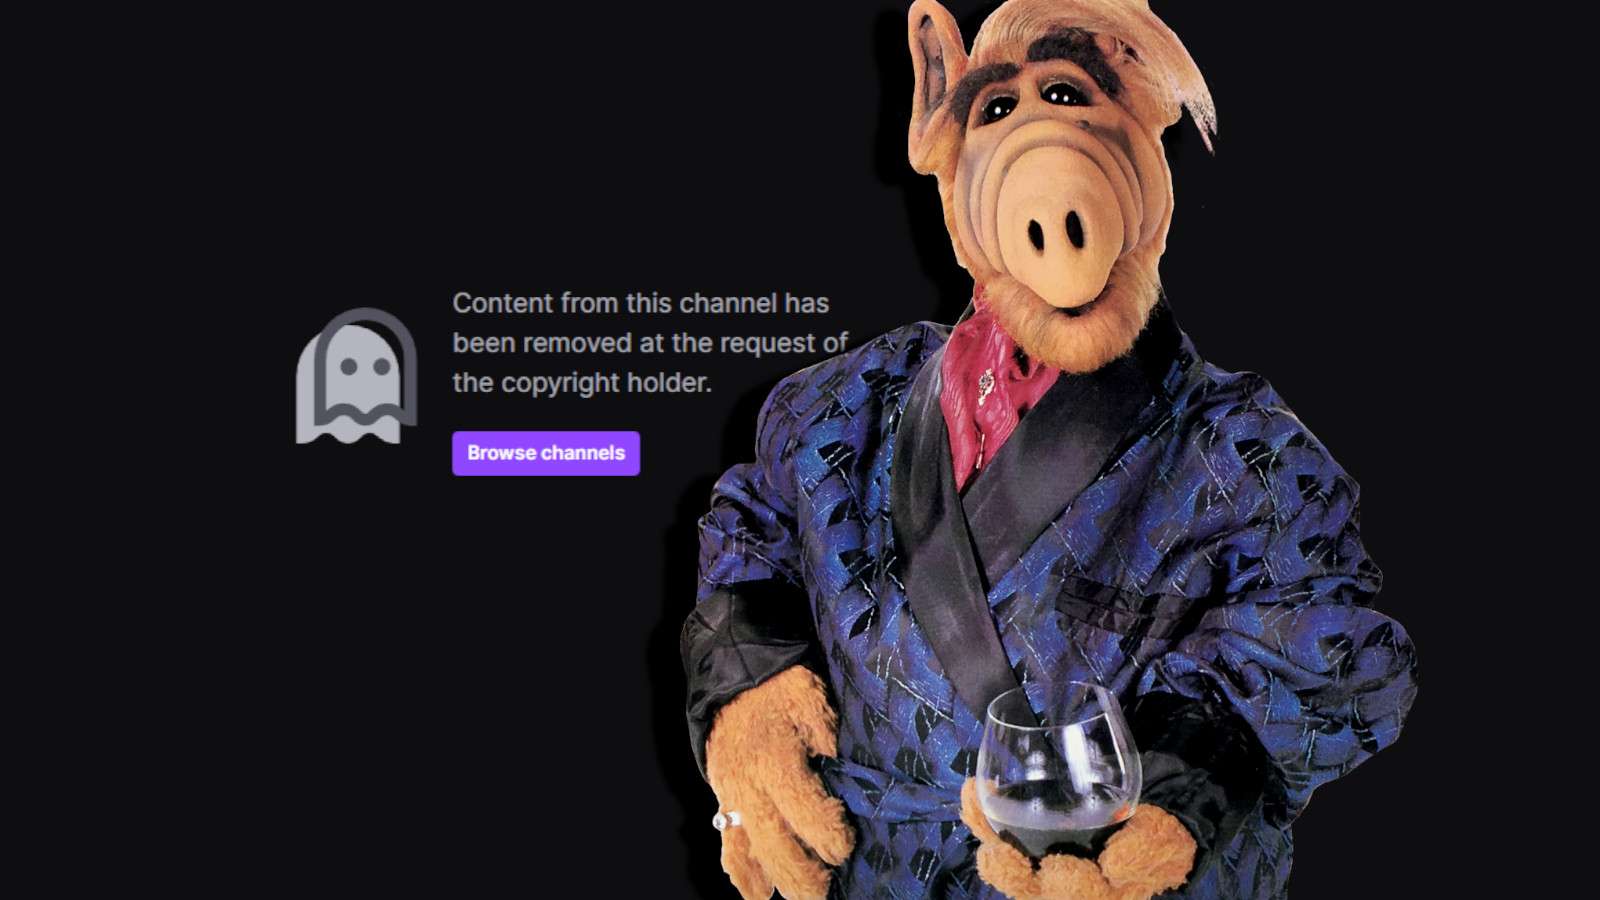 Alf in front of a banned Twitch logo